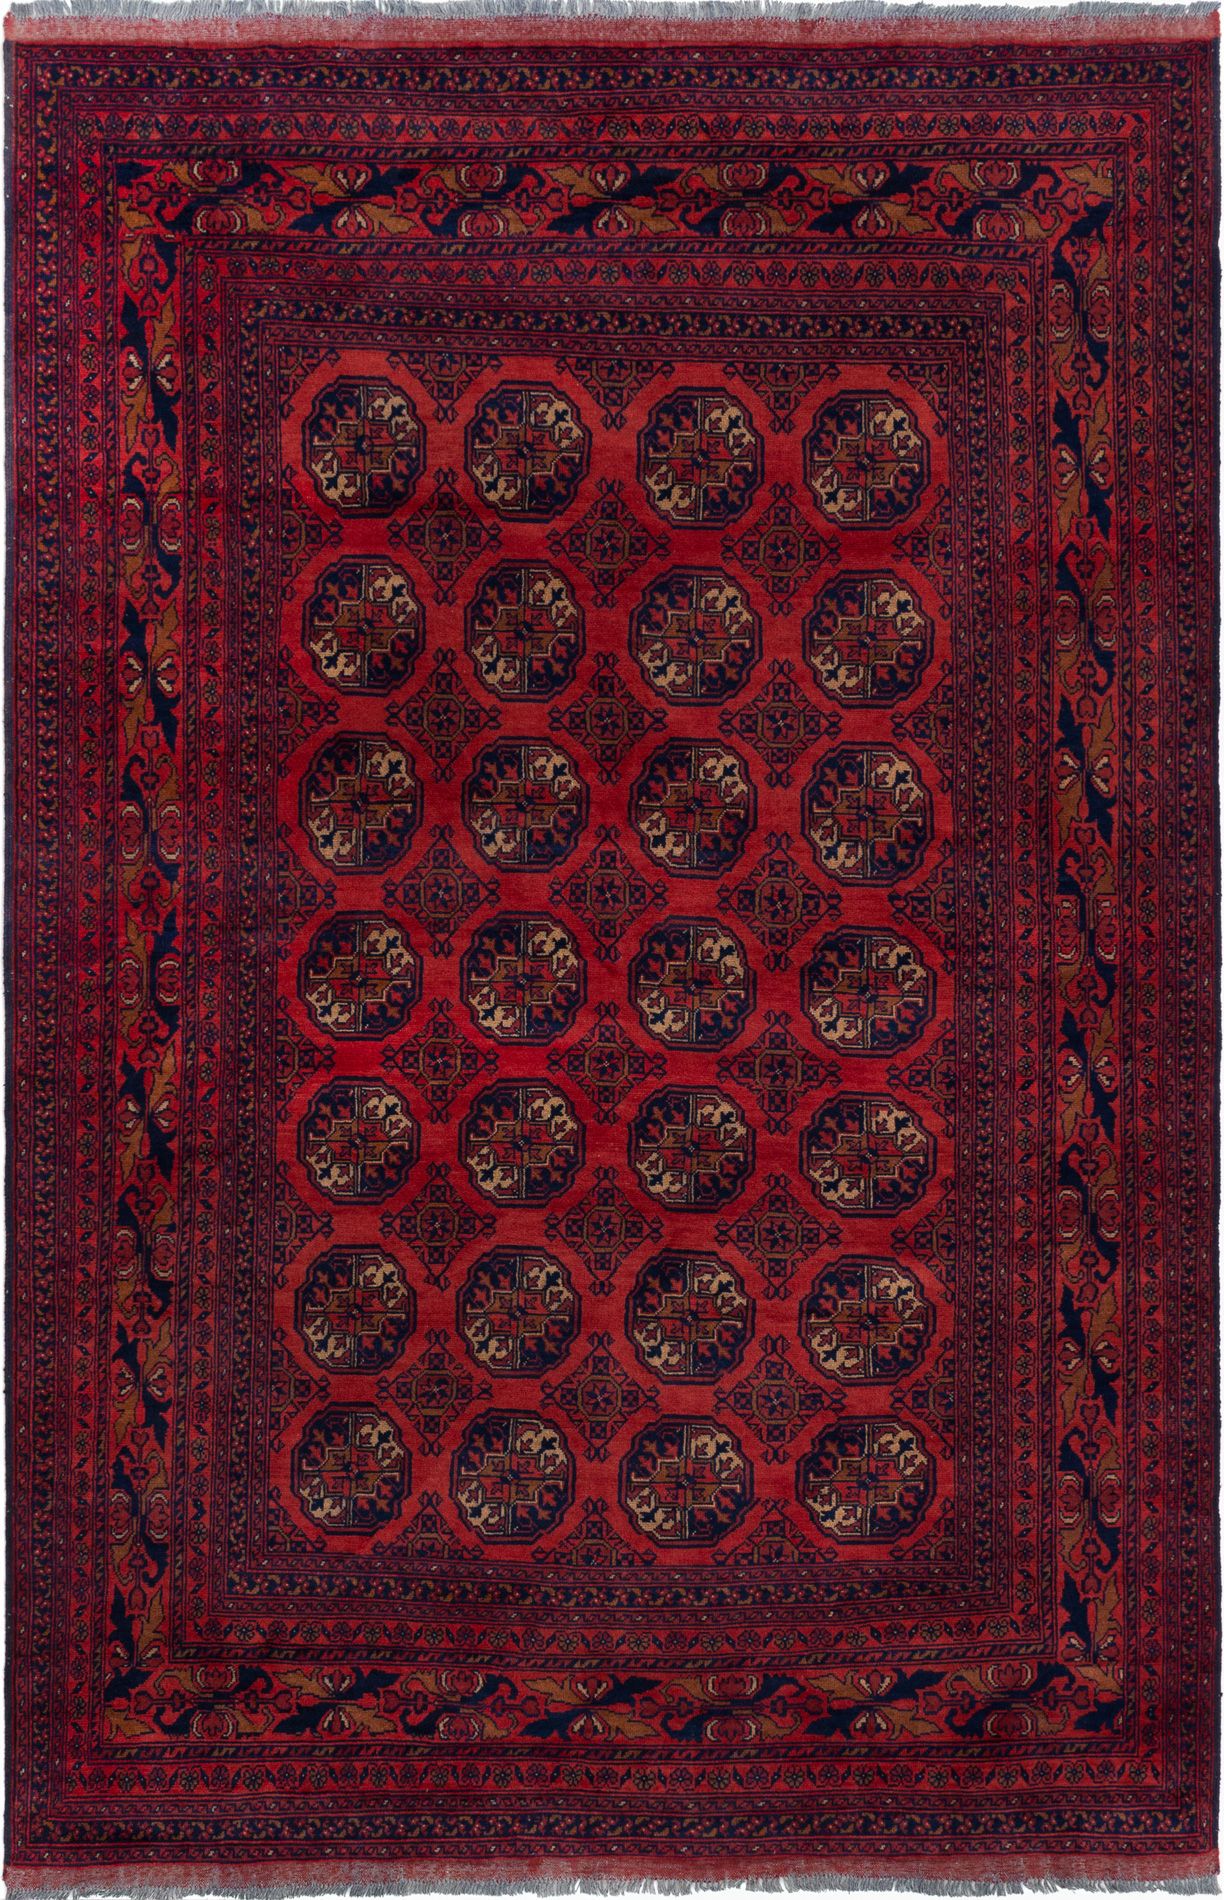 Hand-knotted Finest Khal Mohammadi Red Wool Rug 6'5" x 9'8"  Size: 6'5" x 9'8"  